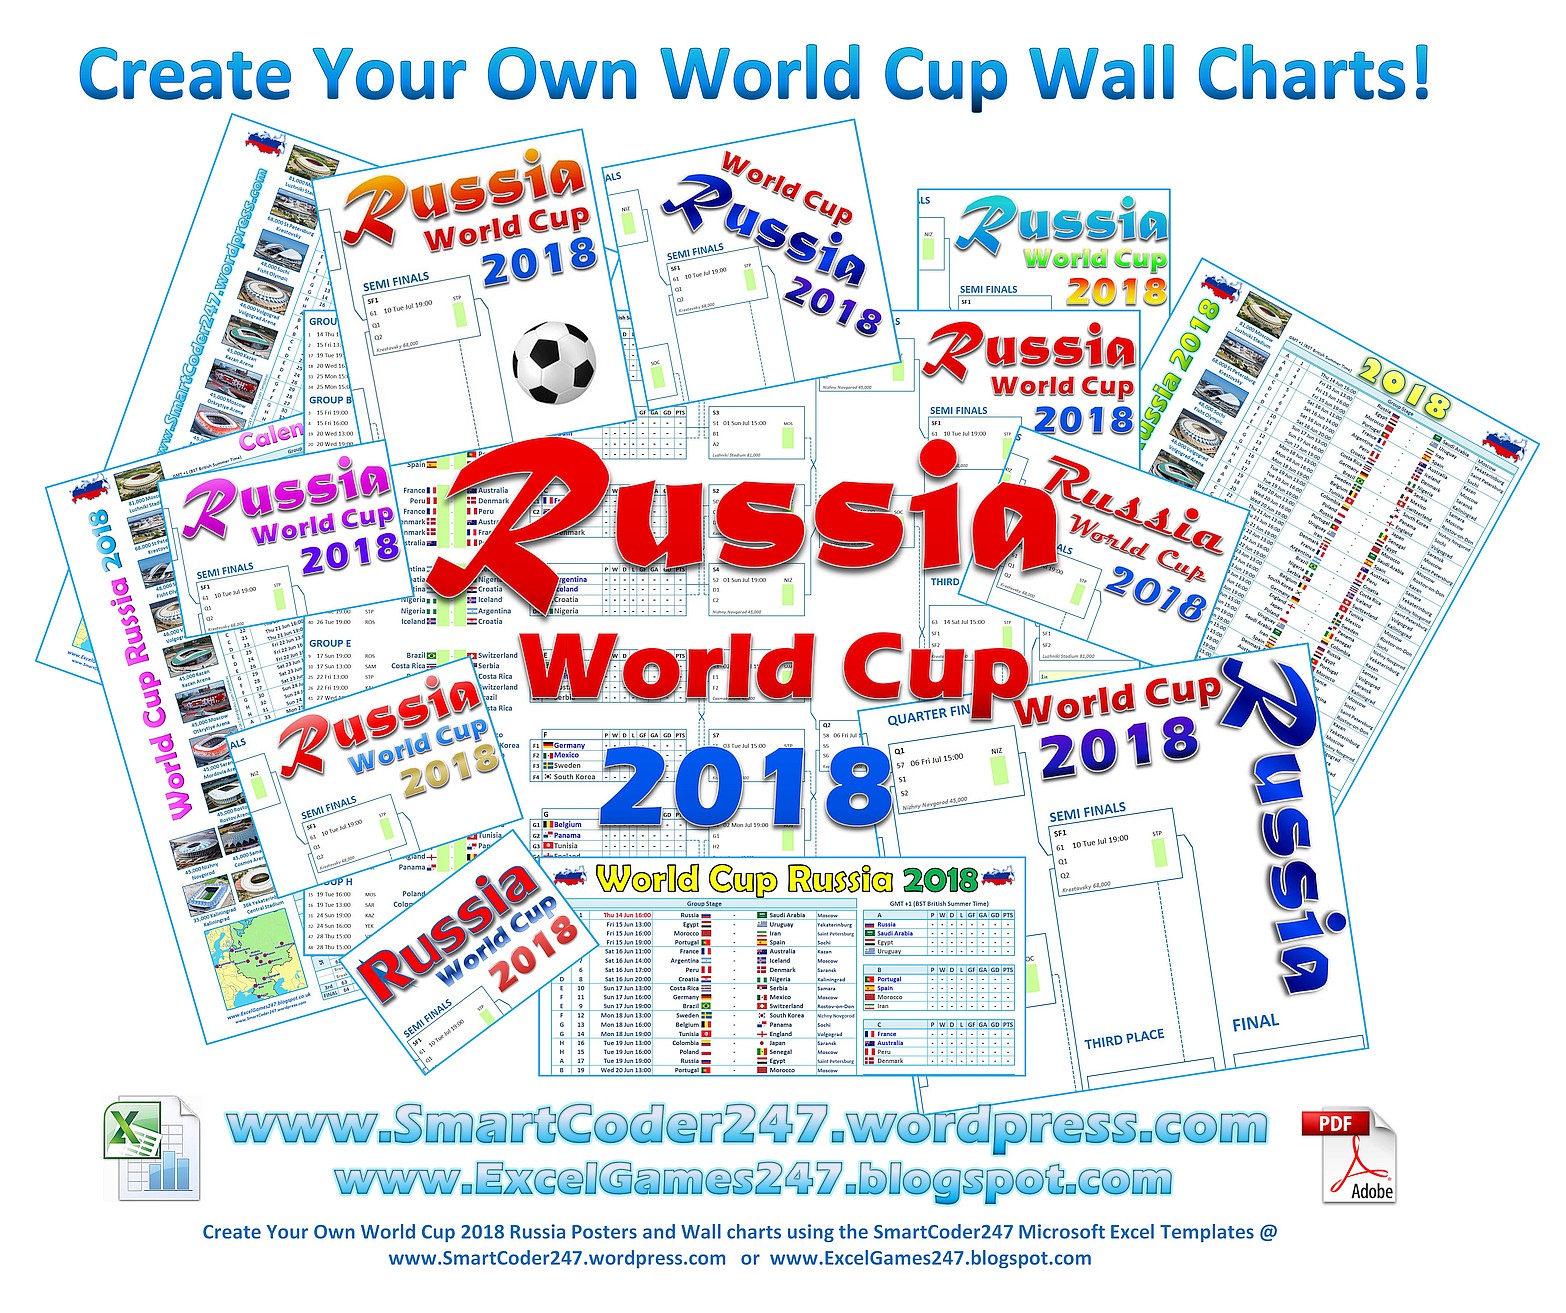 2018 Wall Chart World Cup